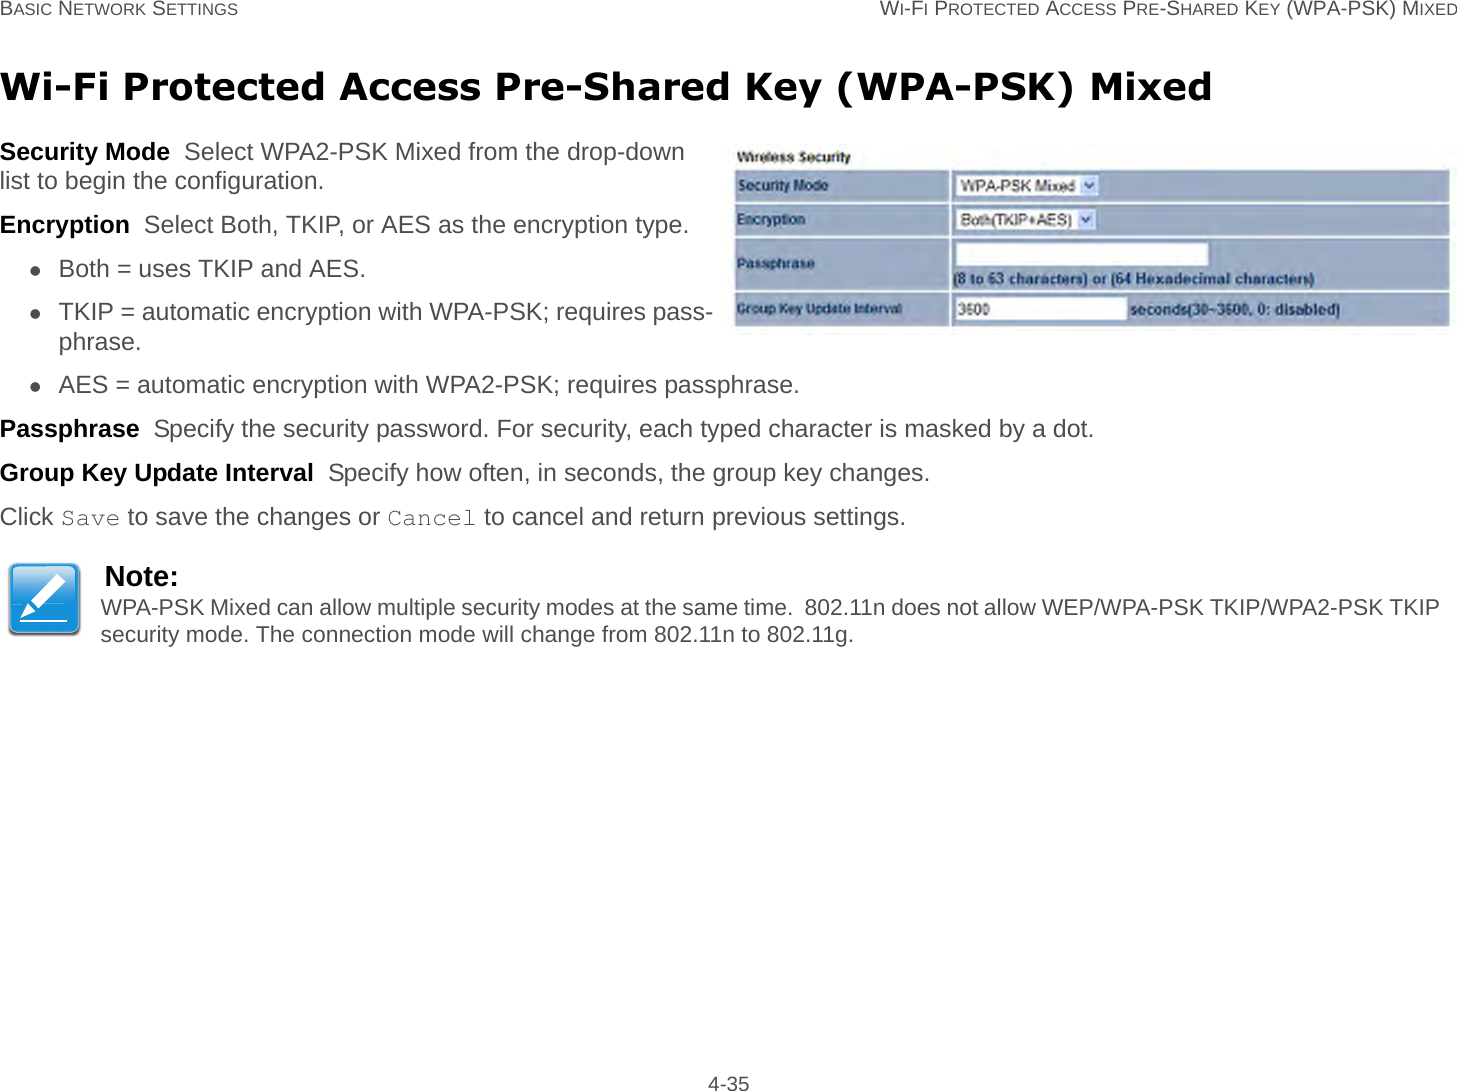 BASIC NETWORK SETTINGS WI-FI PROTECTED ACCESS PRE-SHARED KEY (WPA-PSK) MIXED 4-35Wi-Fi Protected Access Pre-Shared Key (WPA-PSK) MixedSecurity Mode  Select WPA2-PSK Mixed from the drop-down list to begin the configuration.Encryption  Select Both, TKIP, or AES as the encryption type.Both = uses TKIP and AES.TKIP = automatic encryption with WPA-PSK; requires pass-phrase.AES = automatic encryption with WPA2-PSK; requires passphrase.Passphrase  Specify the security password. For security, each typed character is masked by a dot.Group Key Update Interval  Specify how often, in seconds, the group key changes.Click Save to save the changes or Cancel to cancel and return previous settings.Note:WPA-PSK Mixed can allow multiple security modes at the same time.  802.11n does not allow WEP/WPA-PSK TKIP/WPA2-PSK TKIP security mode. The connection mode will change from 802.11n to 802.11g.